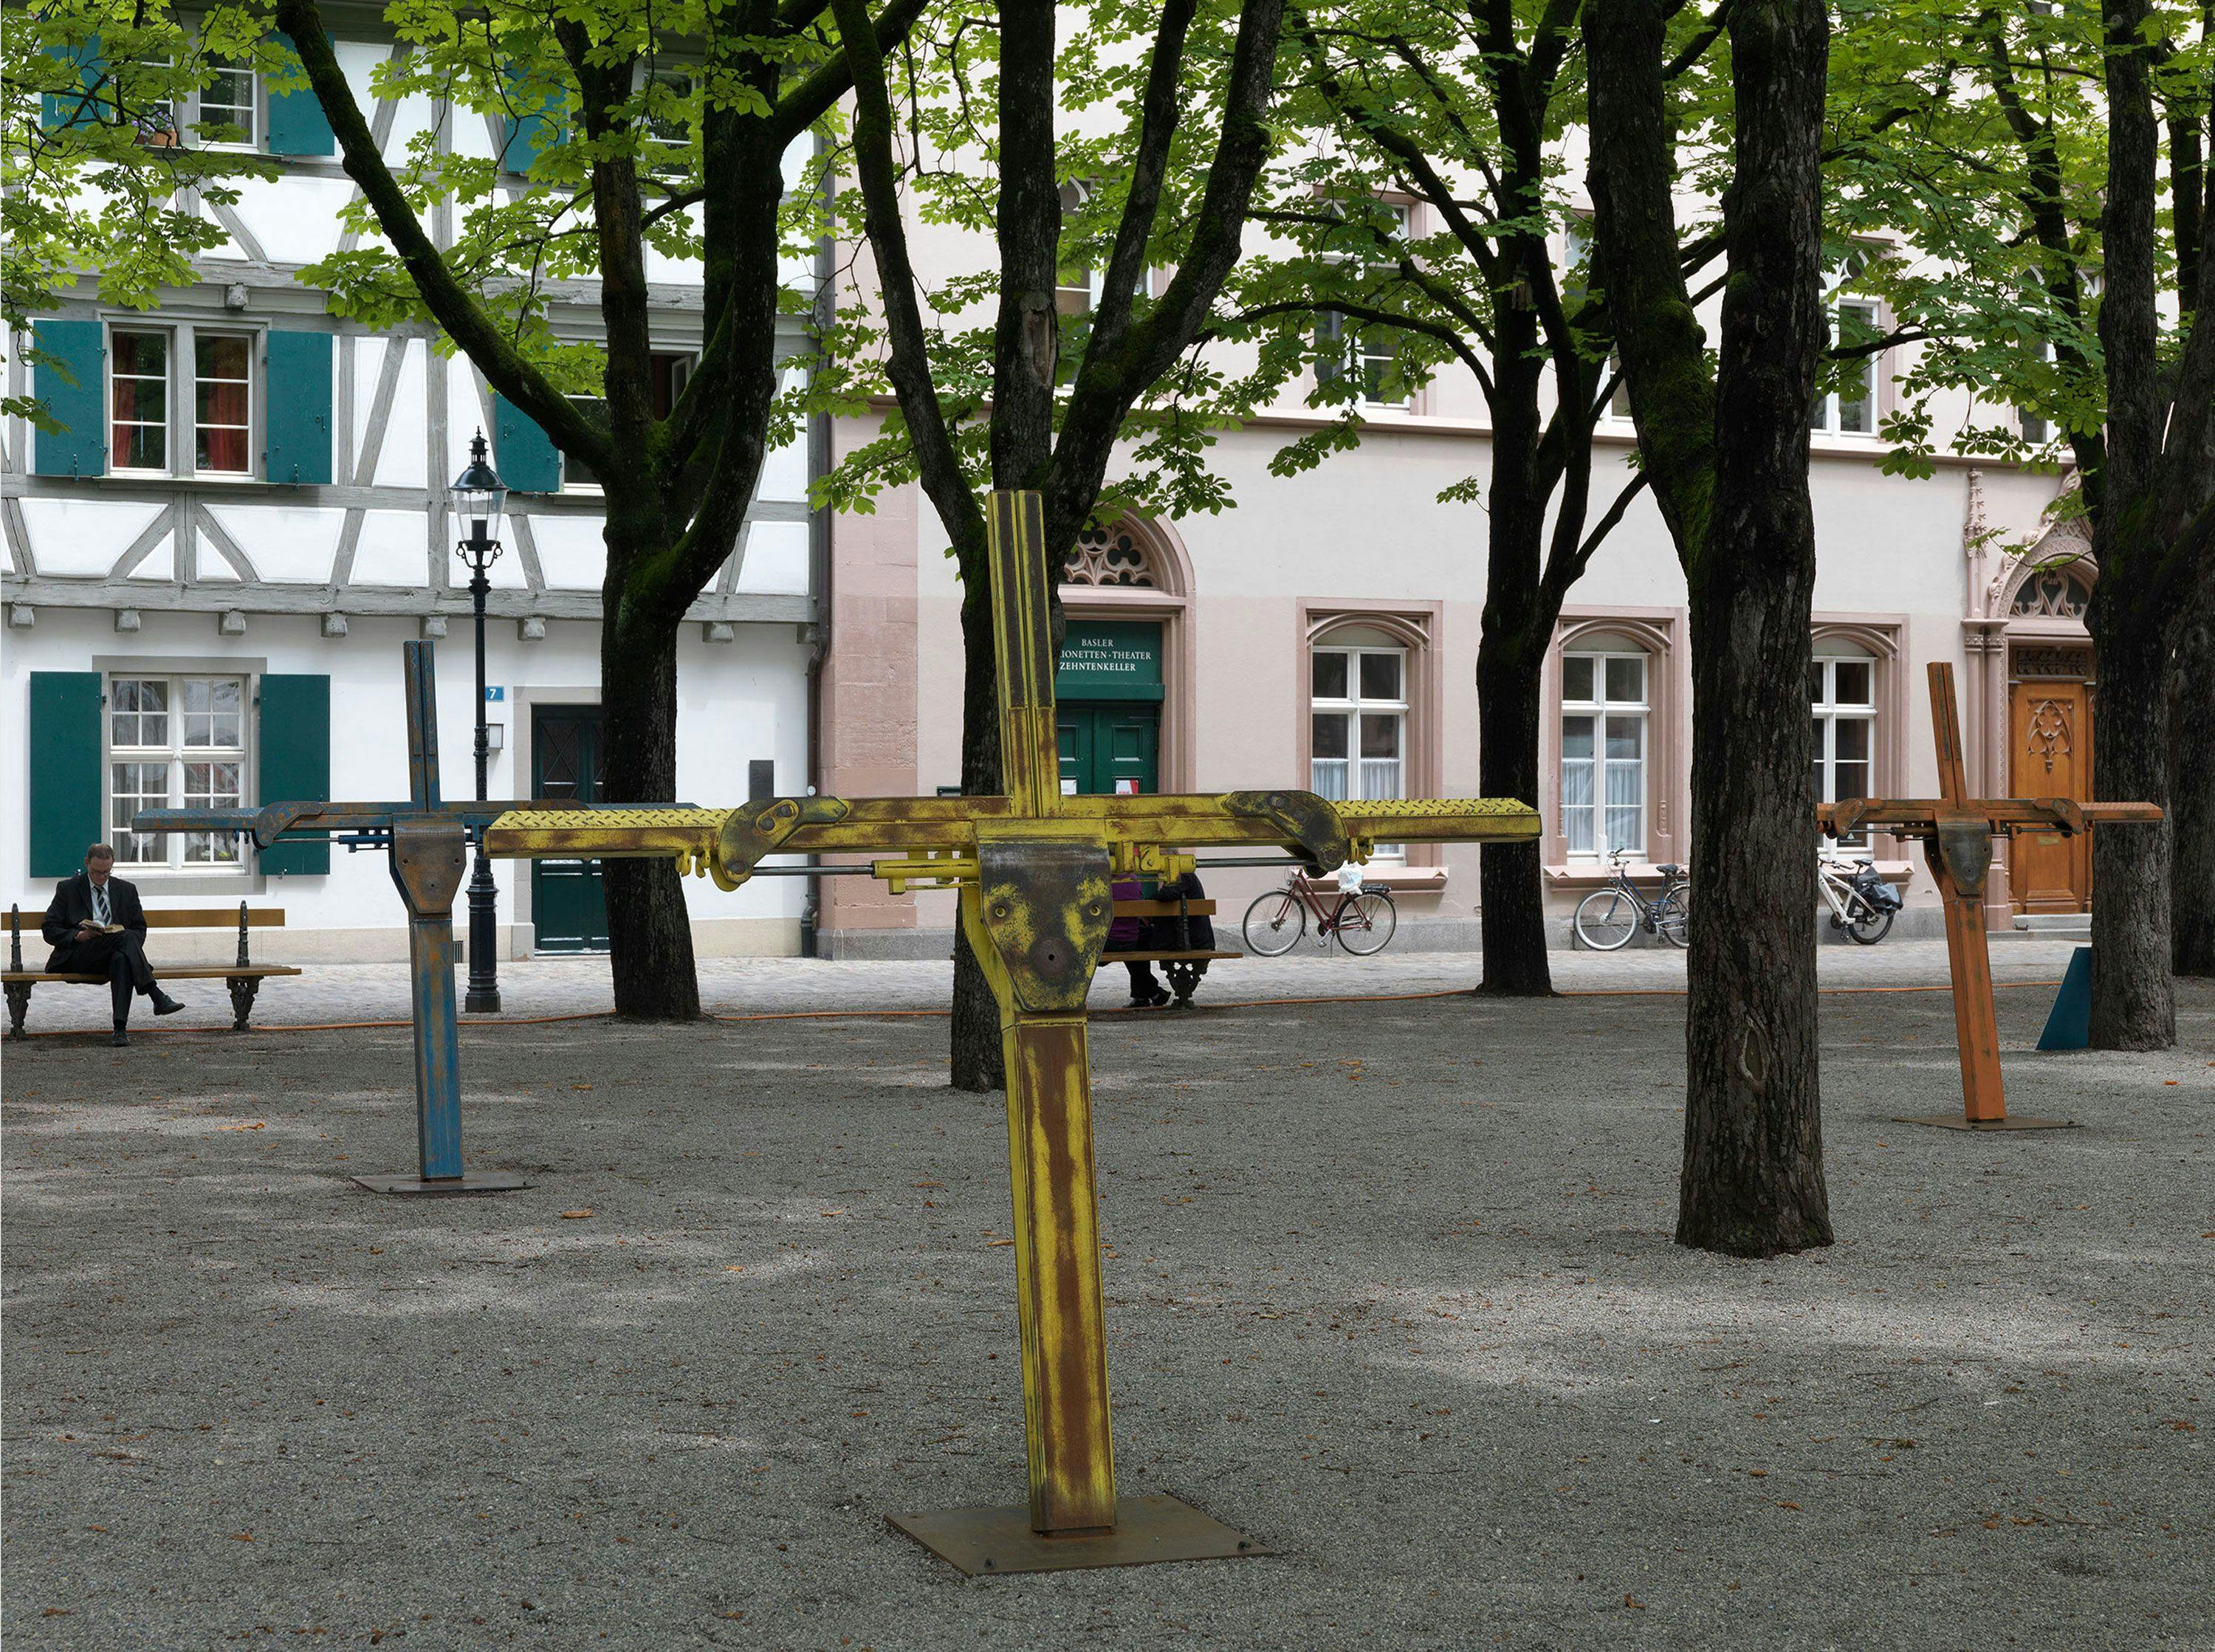 A corten steel and enamel artwork by Nate Lowman, titled Outdoor Tow Truck Installation at Basel Parcours, dated 2015.